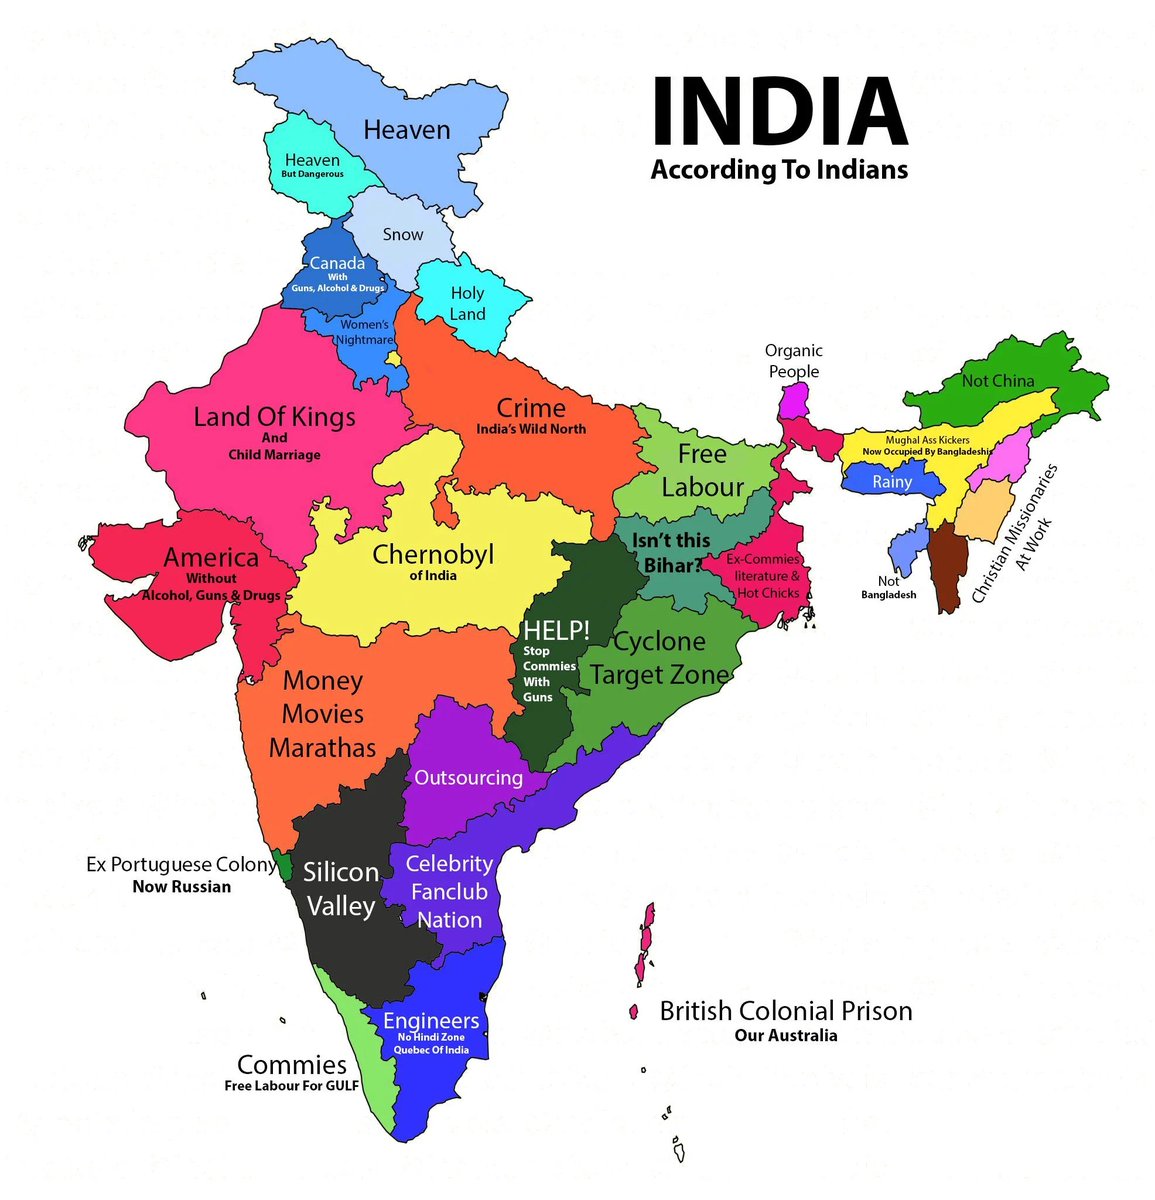 India According To Indians